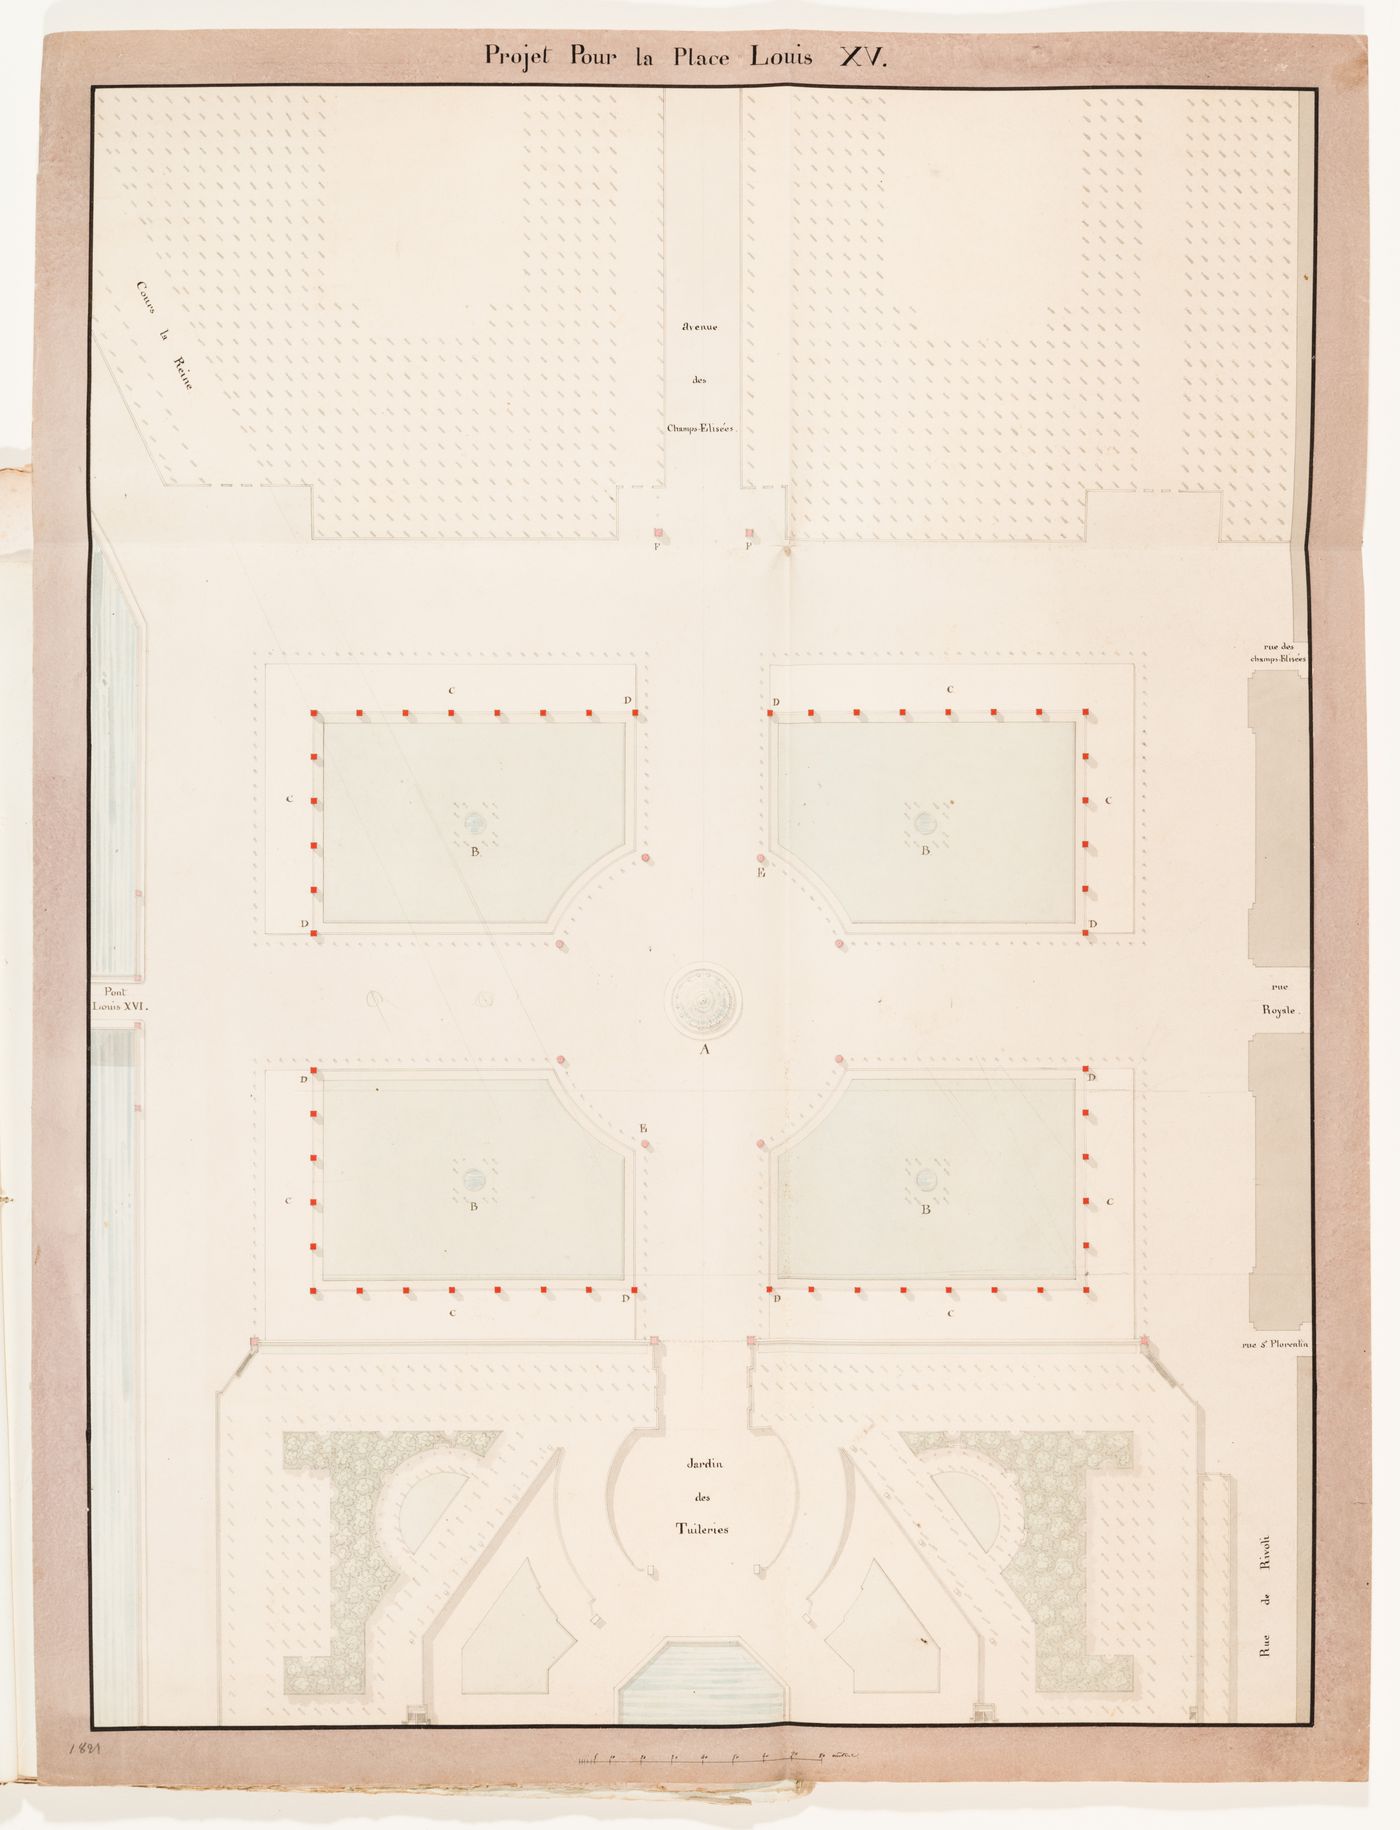 Plan for place Louis XV with five fountains and a promenade bordered by a row of sculptures